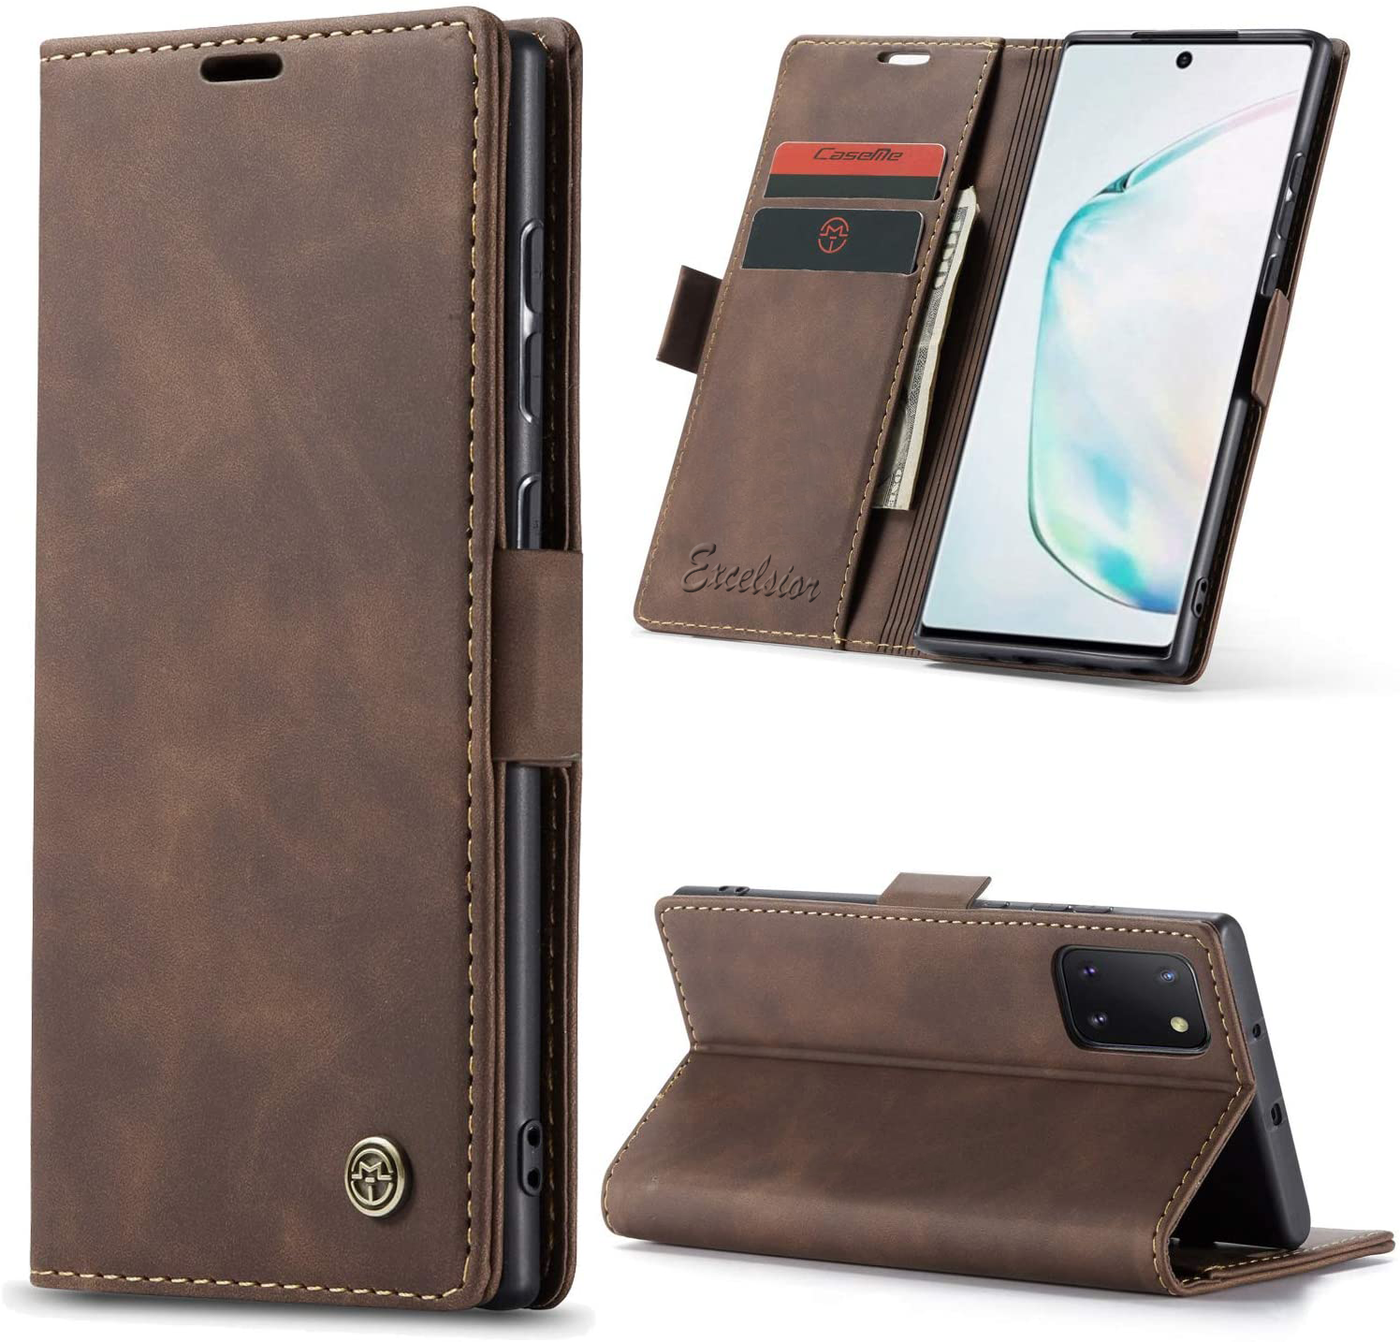 Samsung Galaxy Note 10 Lite 360 degree protection leather wallet flip cover by excelsior